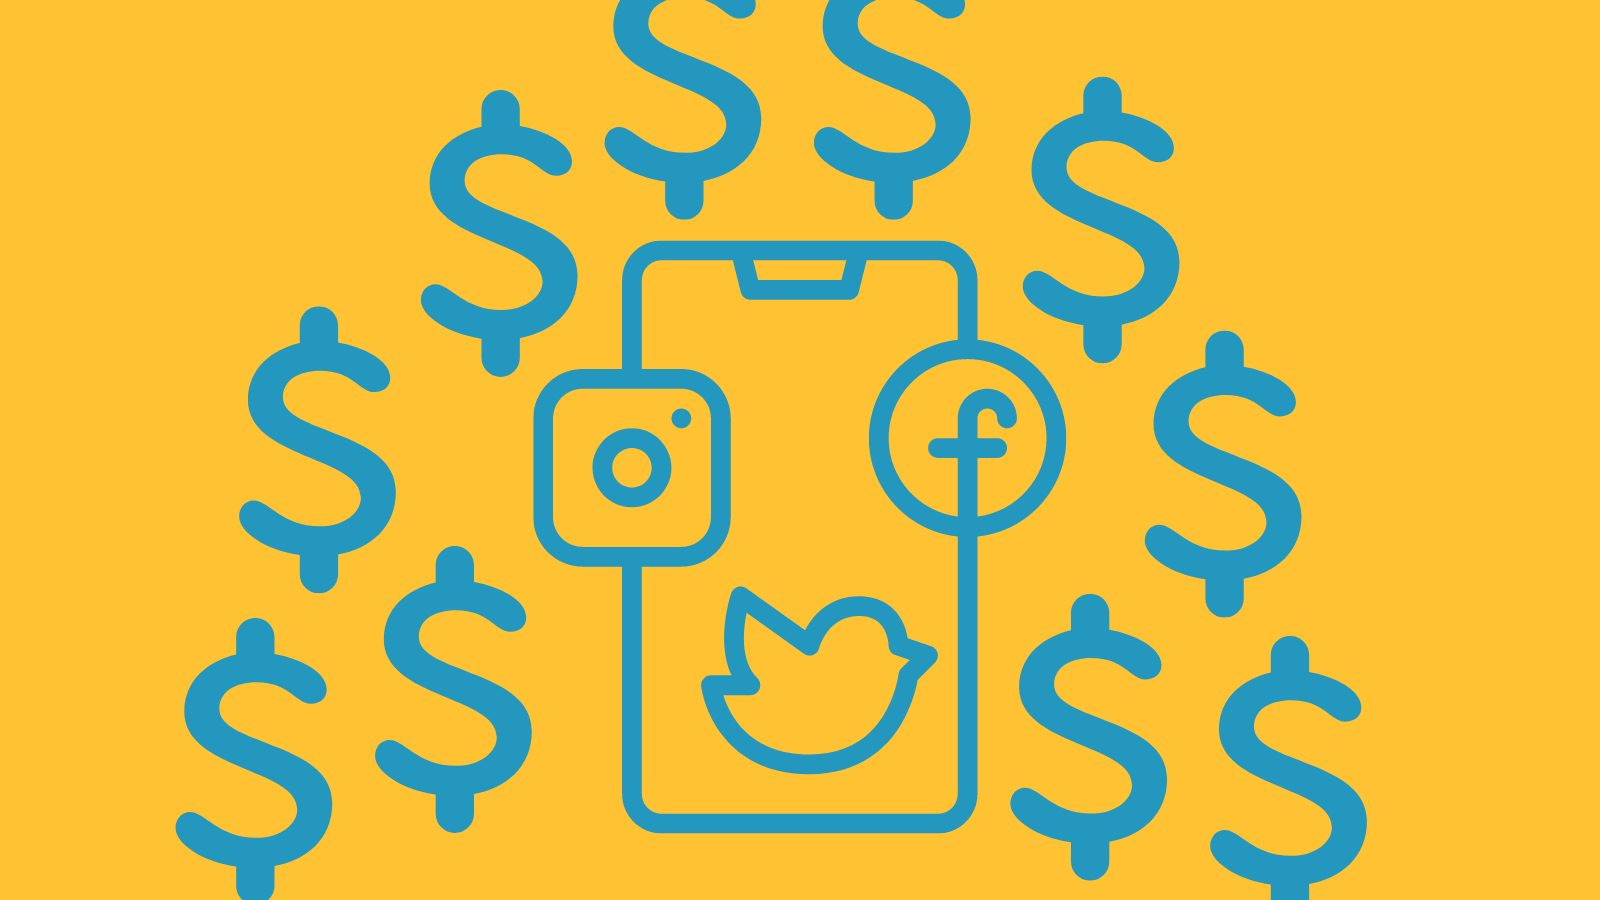 A minimalist graphic of a phone displaying Twitter, Instagram, and Facebook logos surrounded by dollar signs